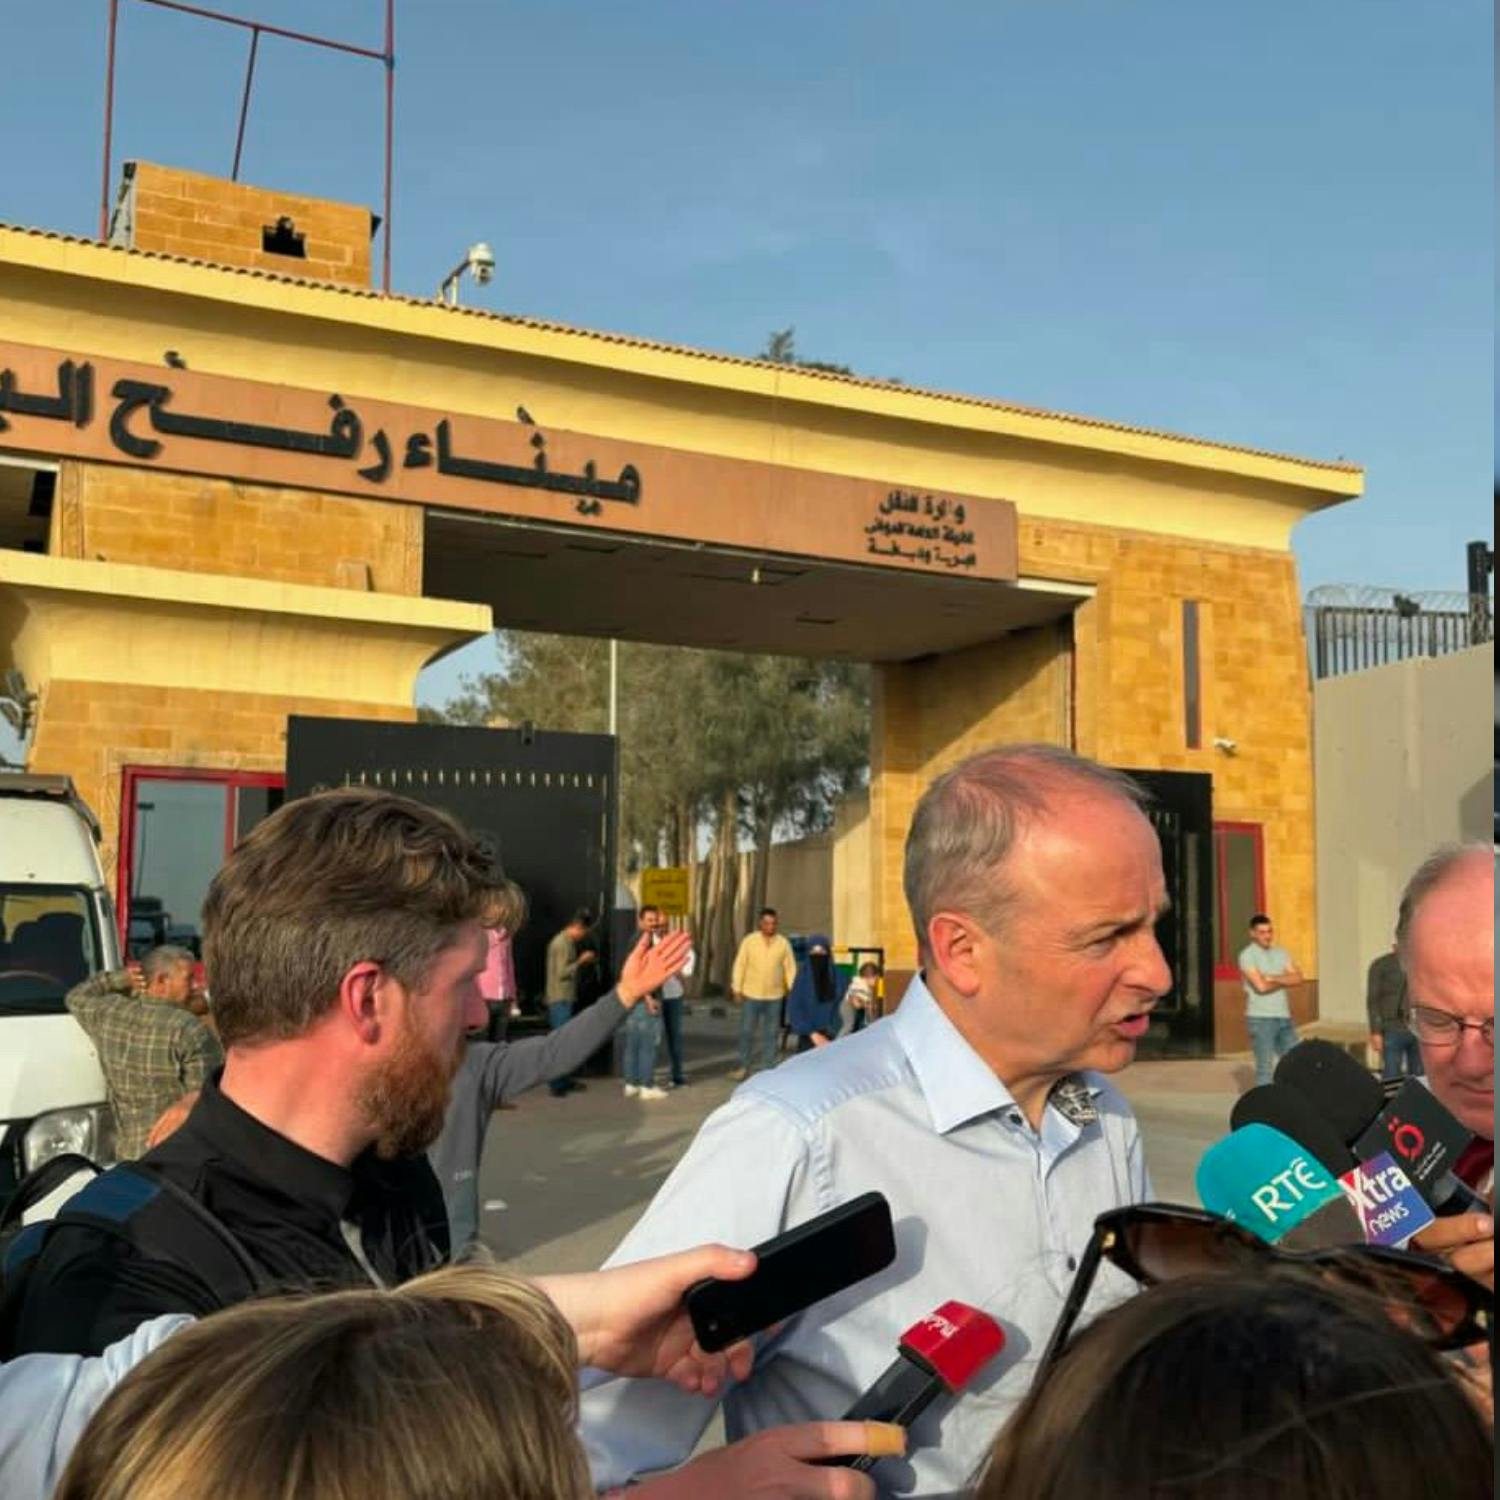 The Tanaiste Michael Martin and a small group of Irish journalists visited the Rafah border crossing yesterday